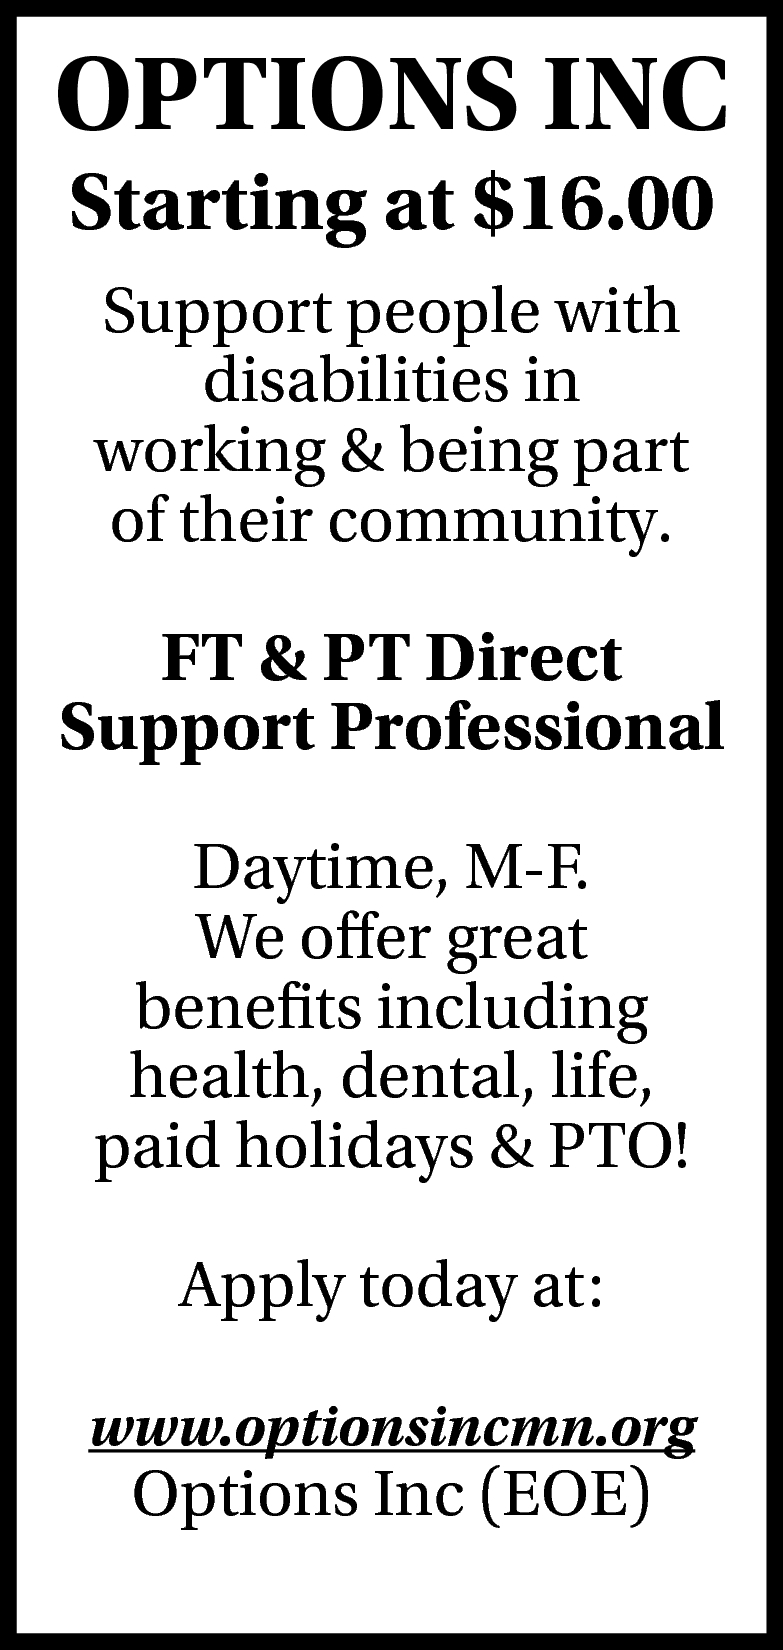 FT & PT Direct Support Professional